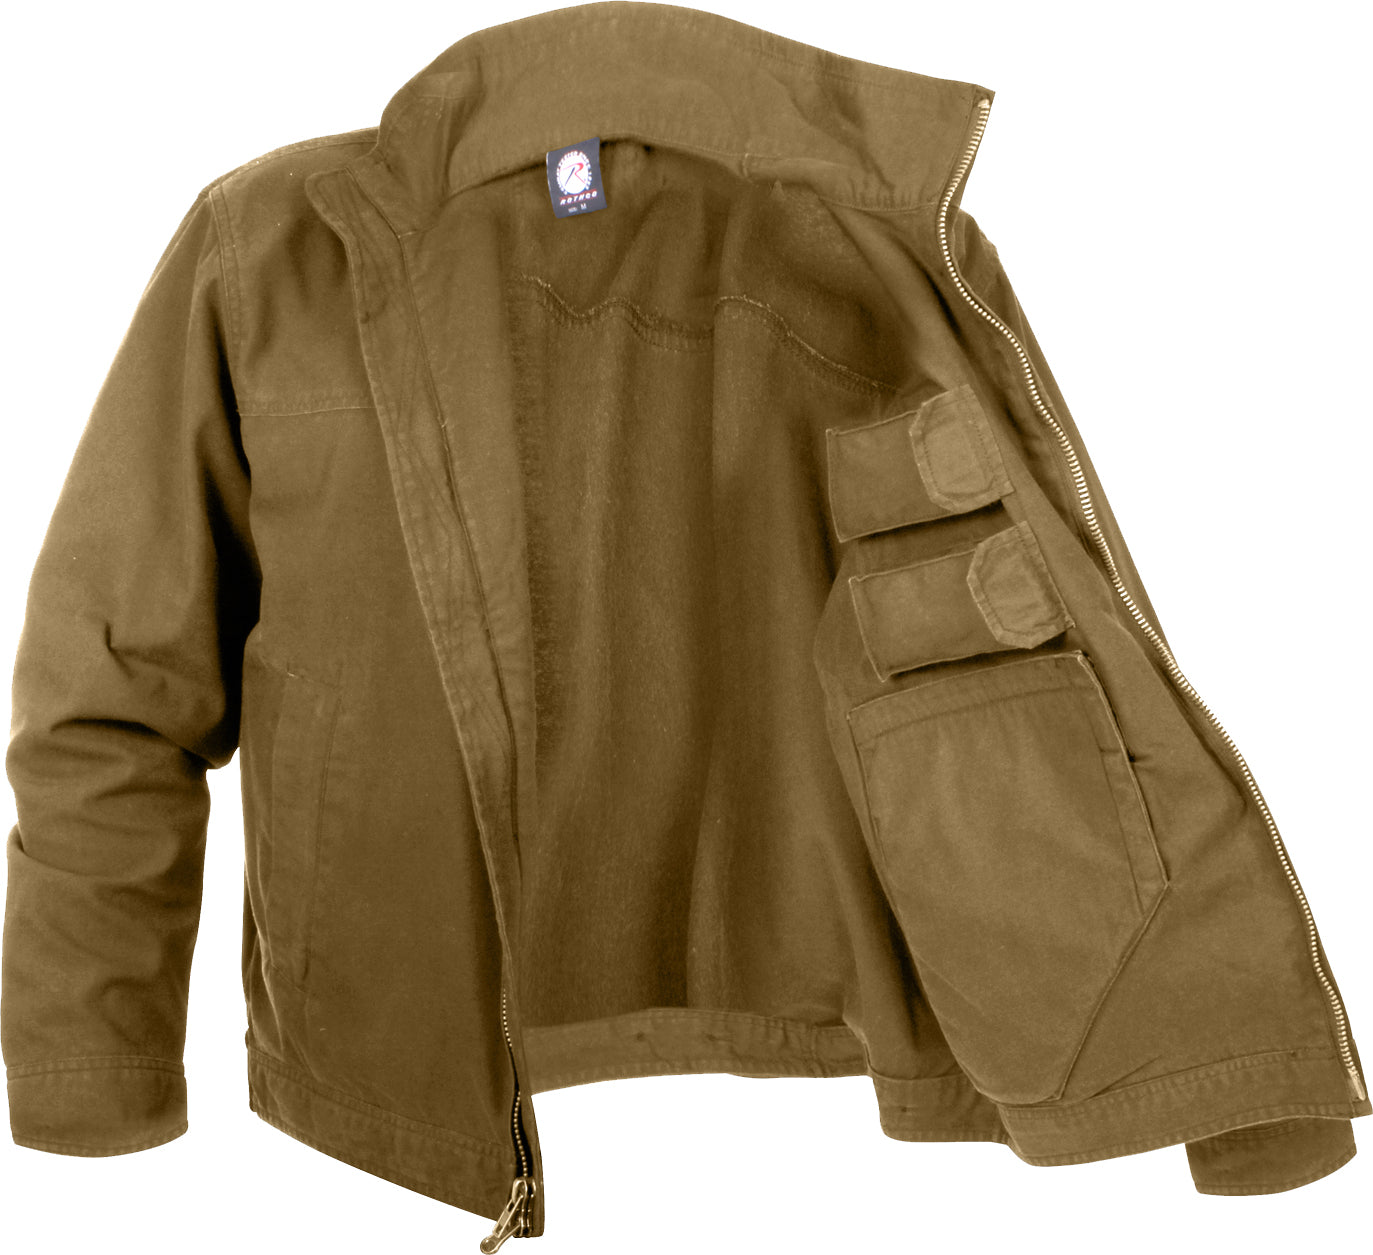 Coyote Brown - Lightweight Concealed Carry Jacket